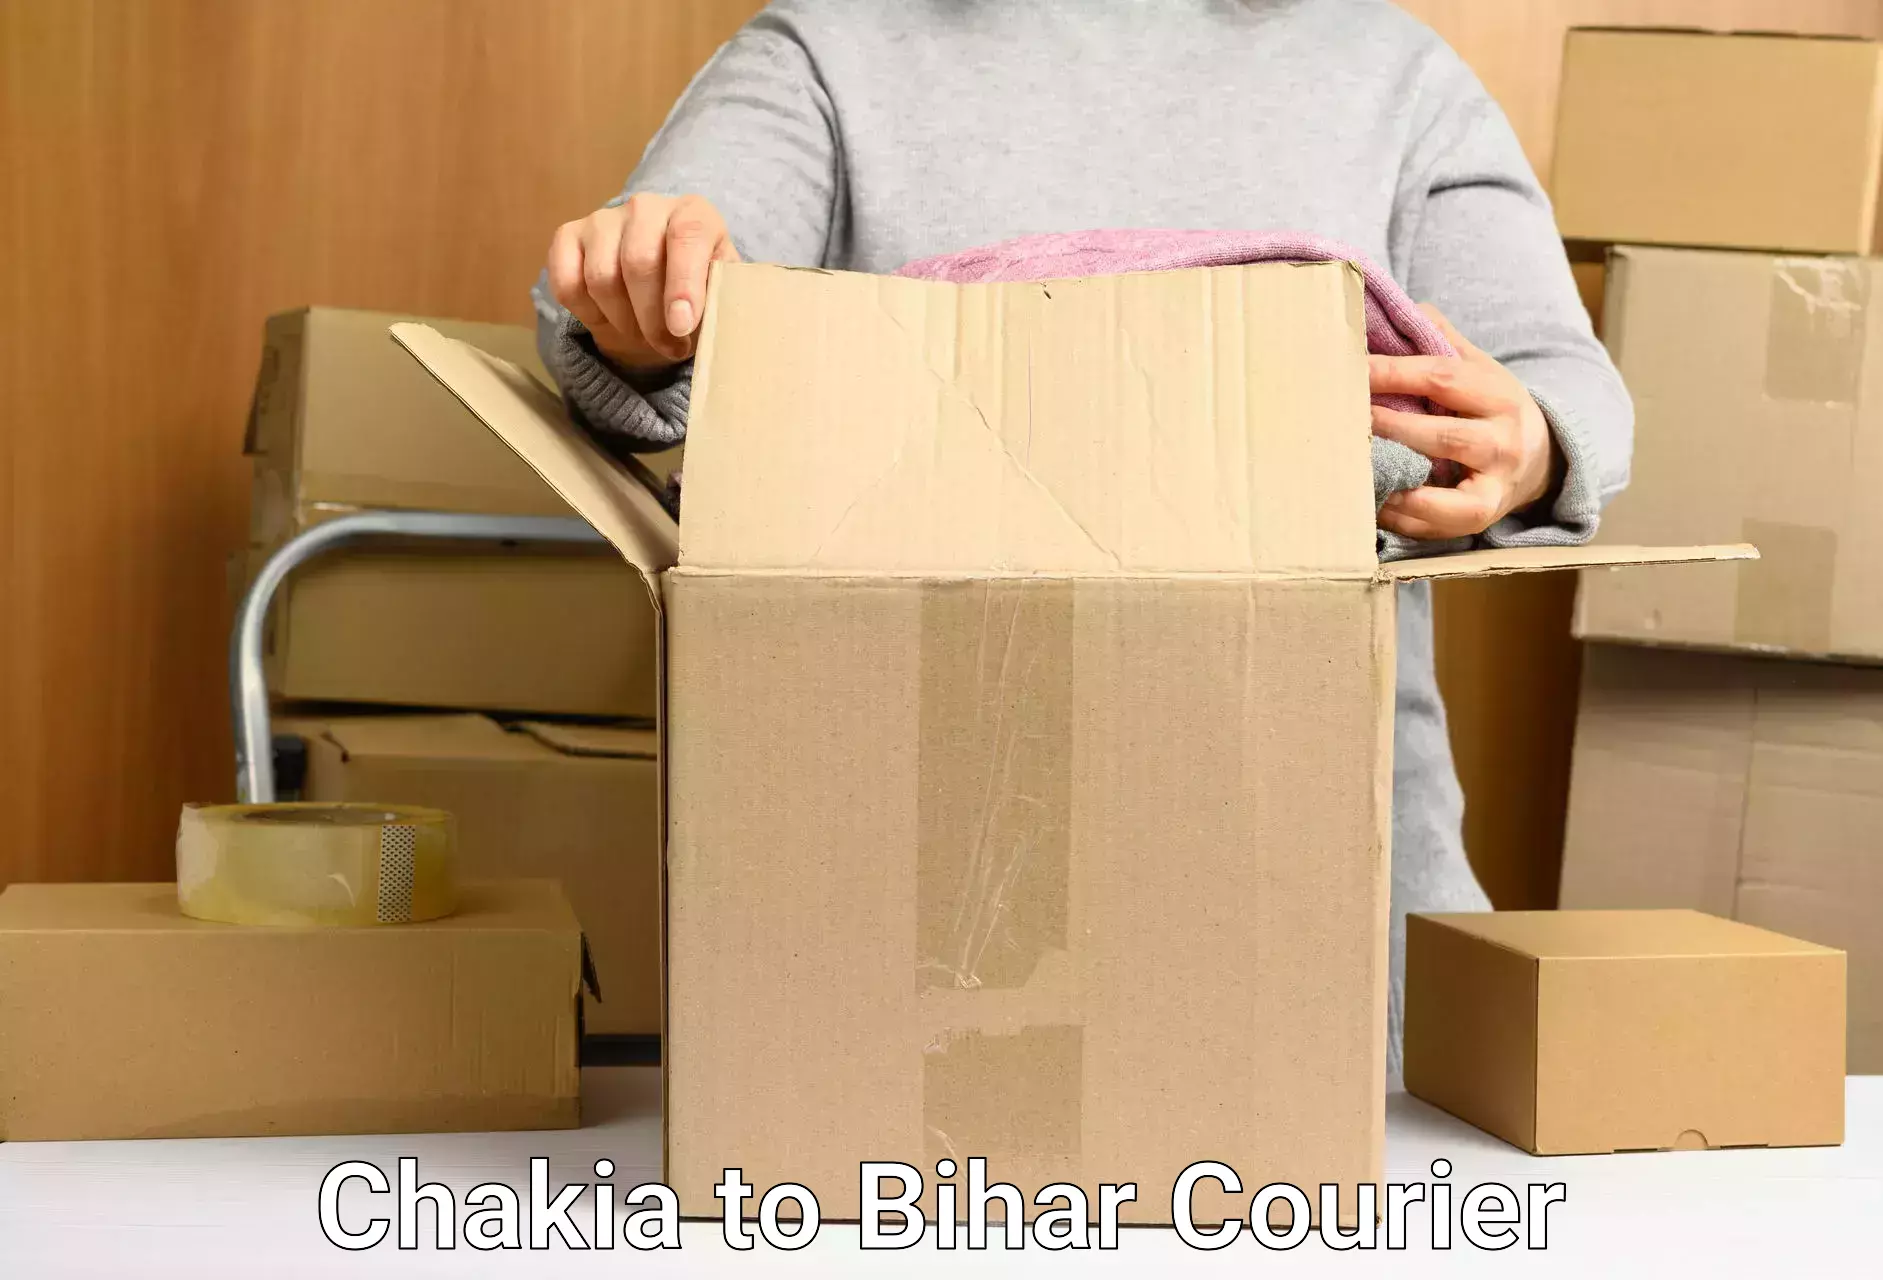 Parcel handling and care Chakia to Sharfuddinpur